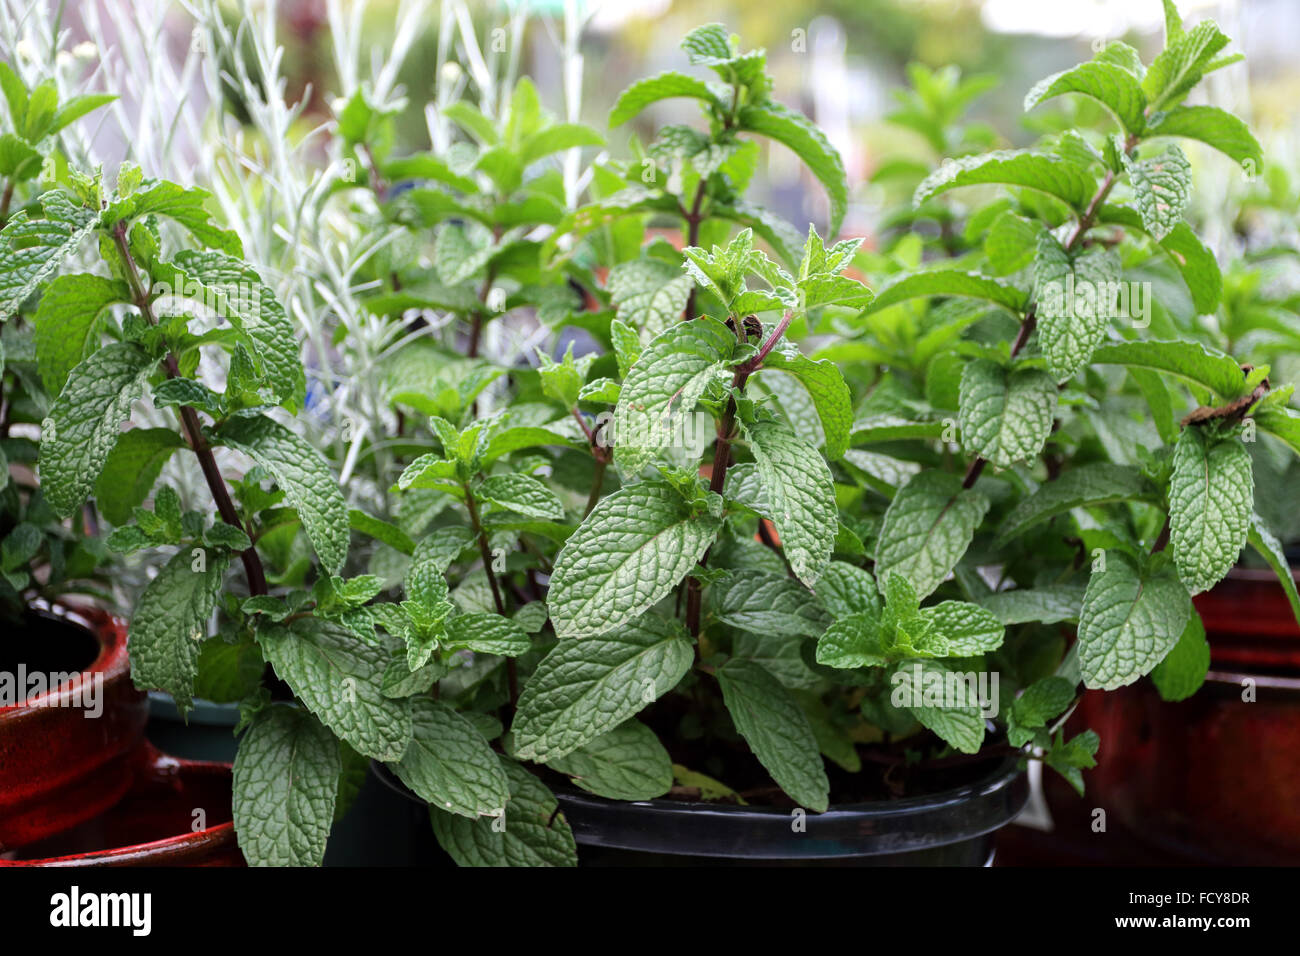 Close up of spearmint plant or known as Mentha spicata Stock Photo